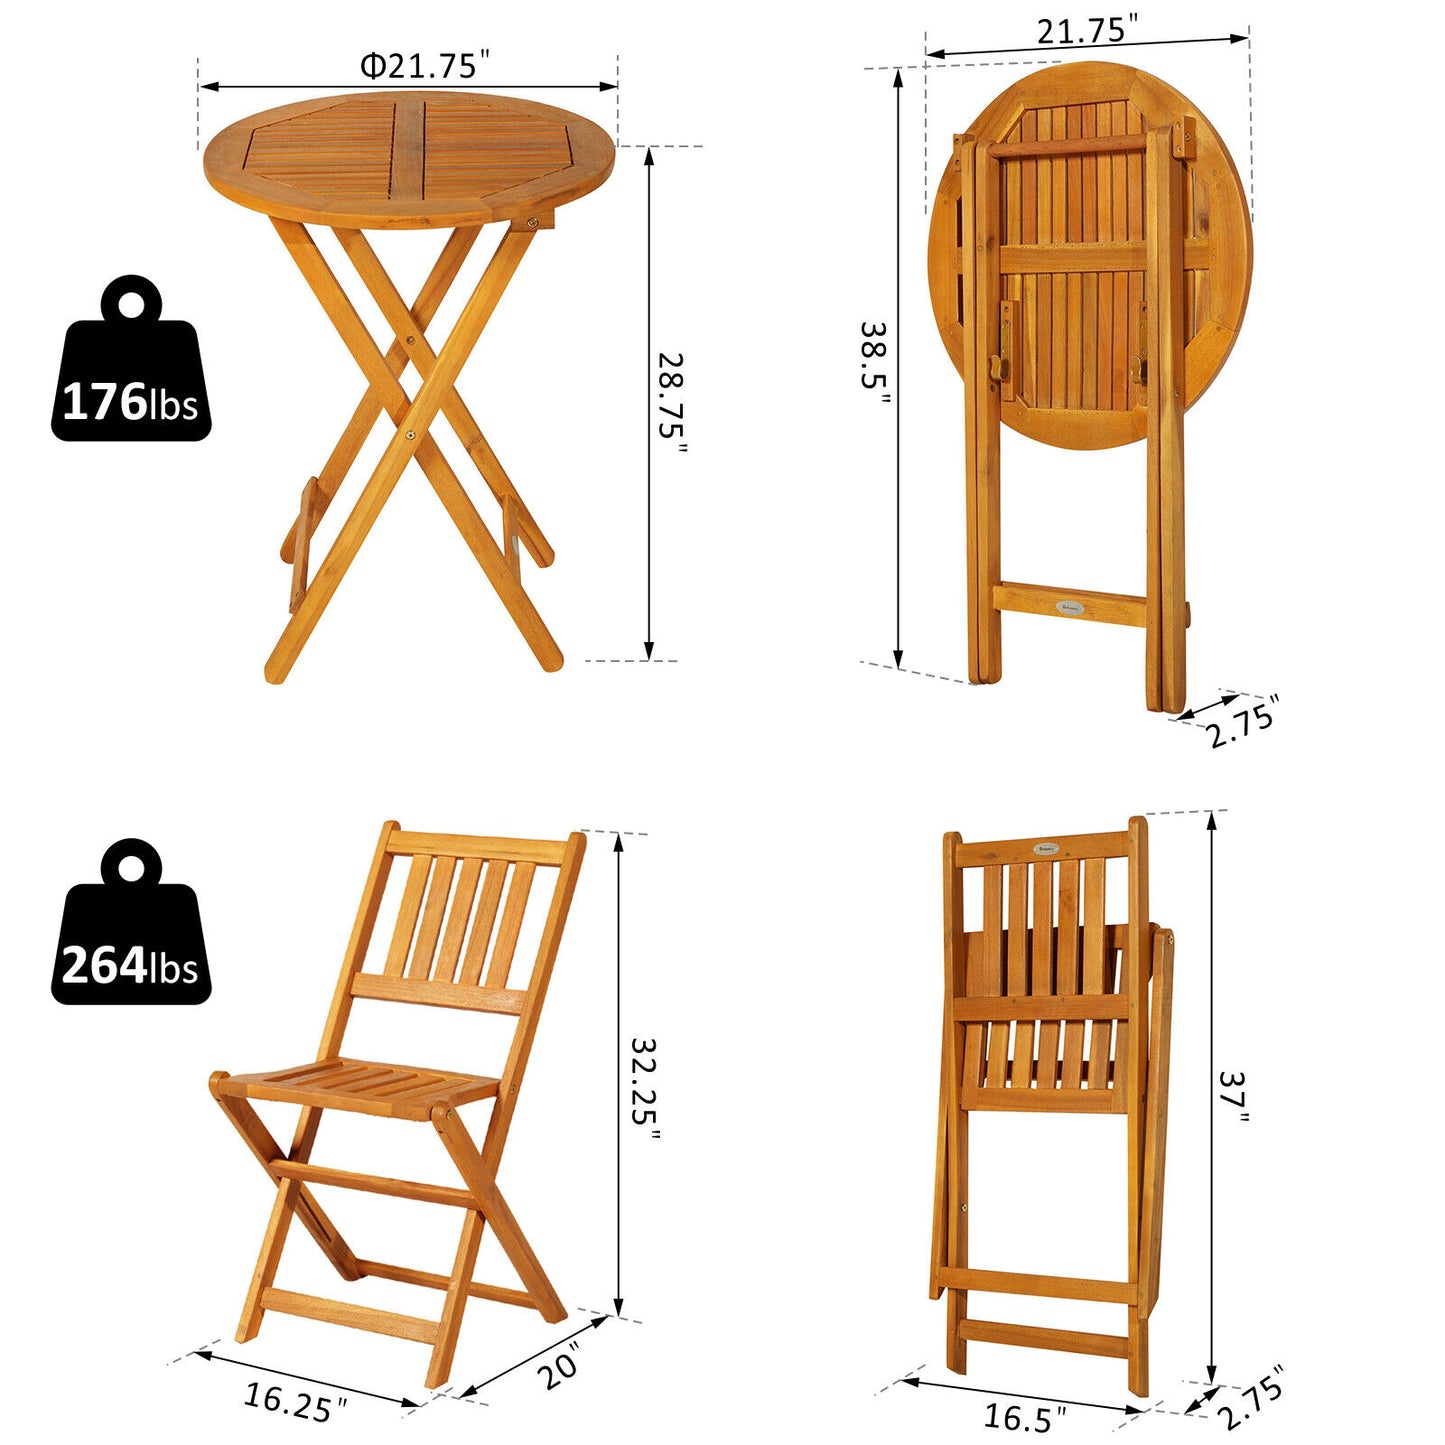 Bistro Set - 3 Piece Acacia Wood Bistro Table And Chairs